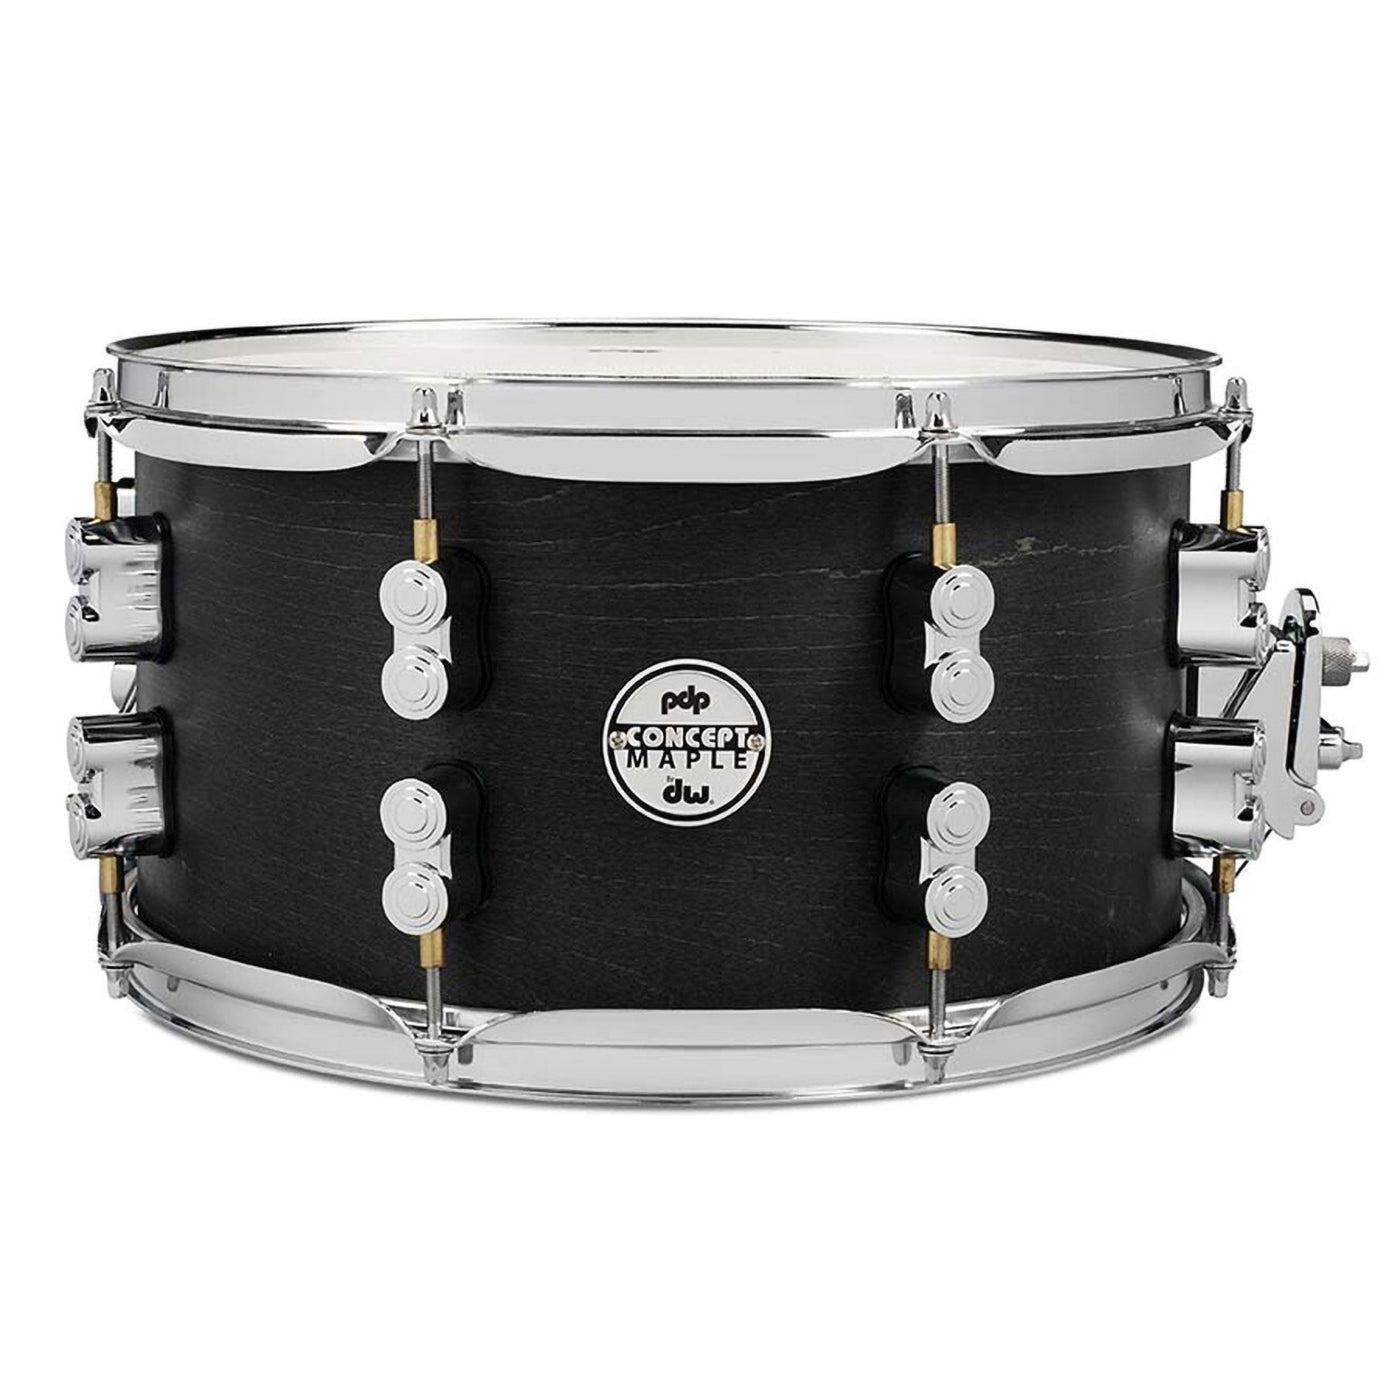 DW PDP Concept Snare 7" X 13" Black Wax Snare Drum